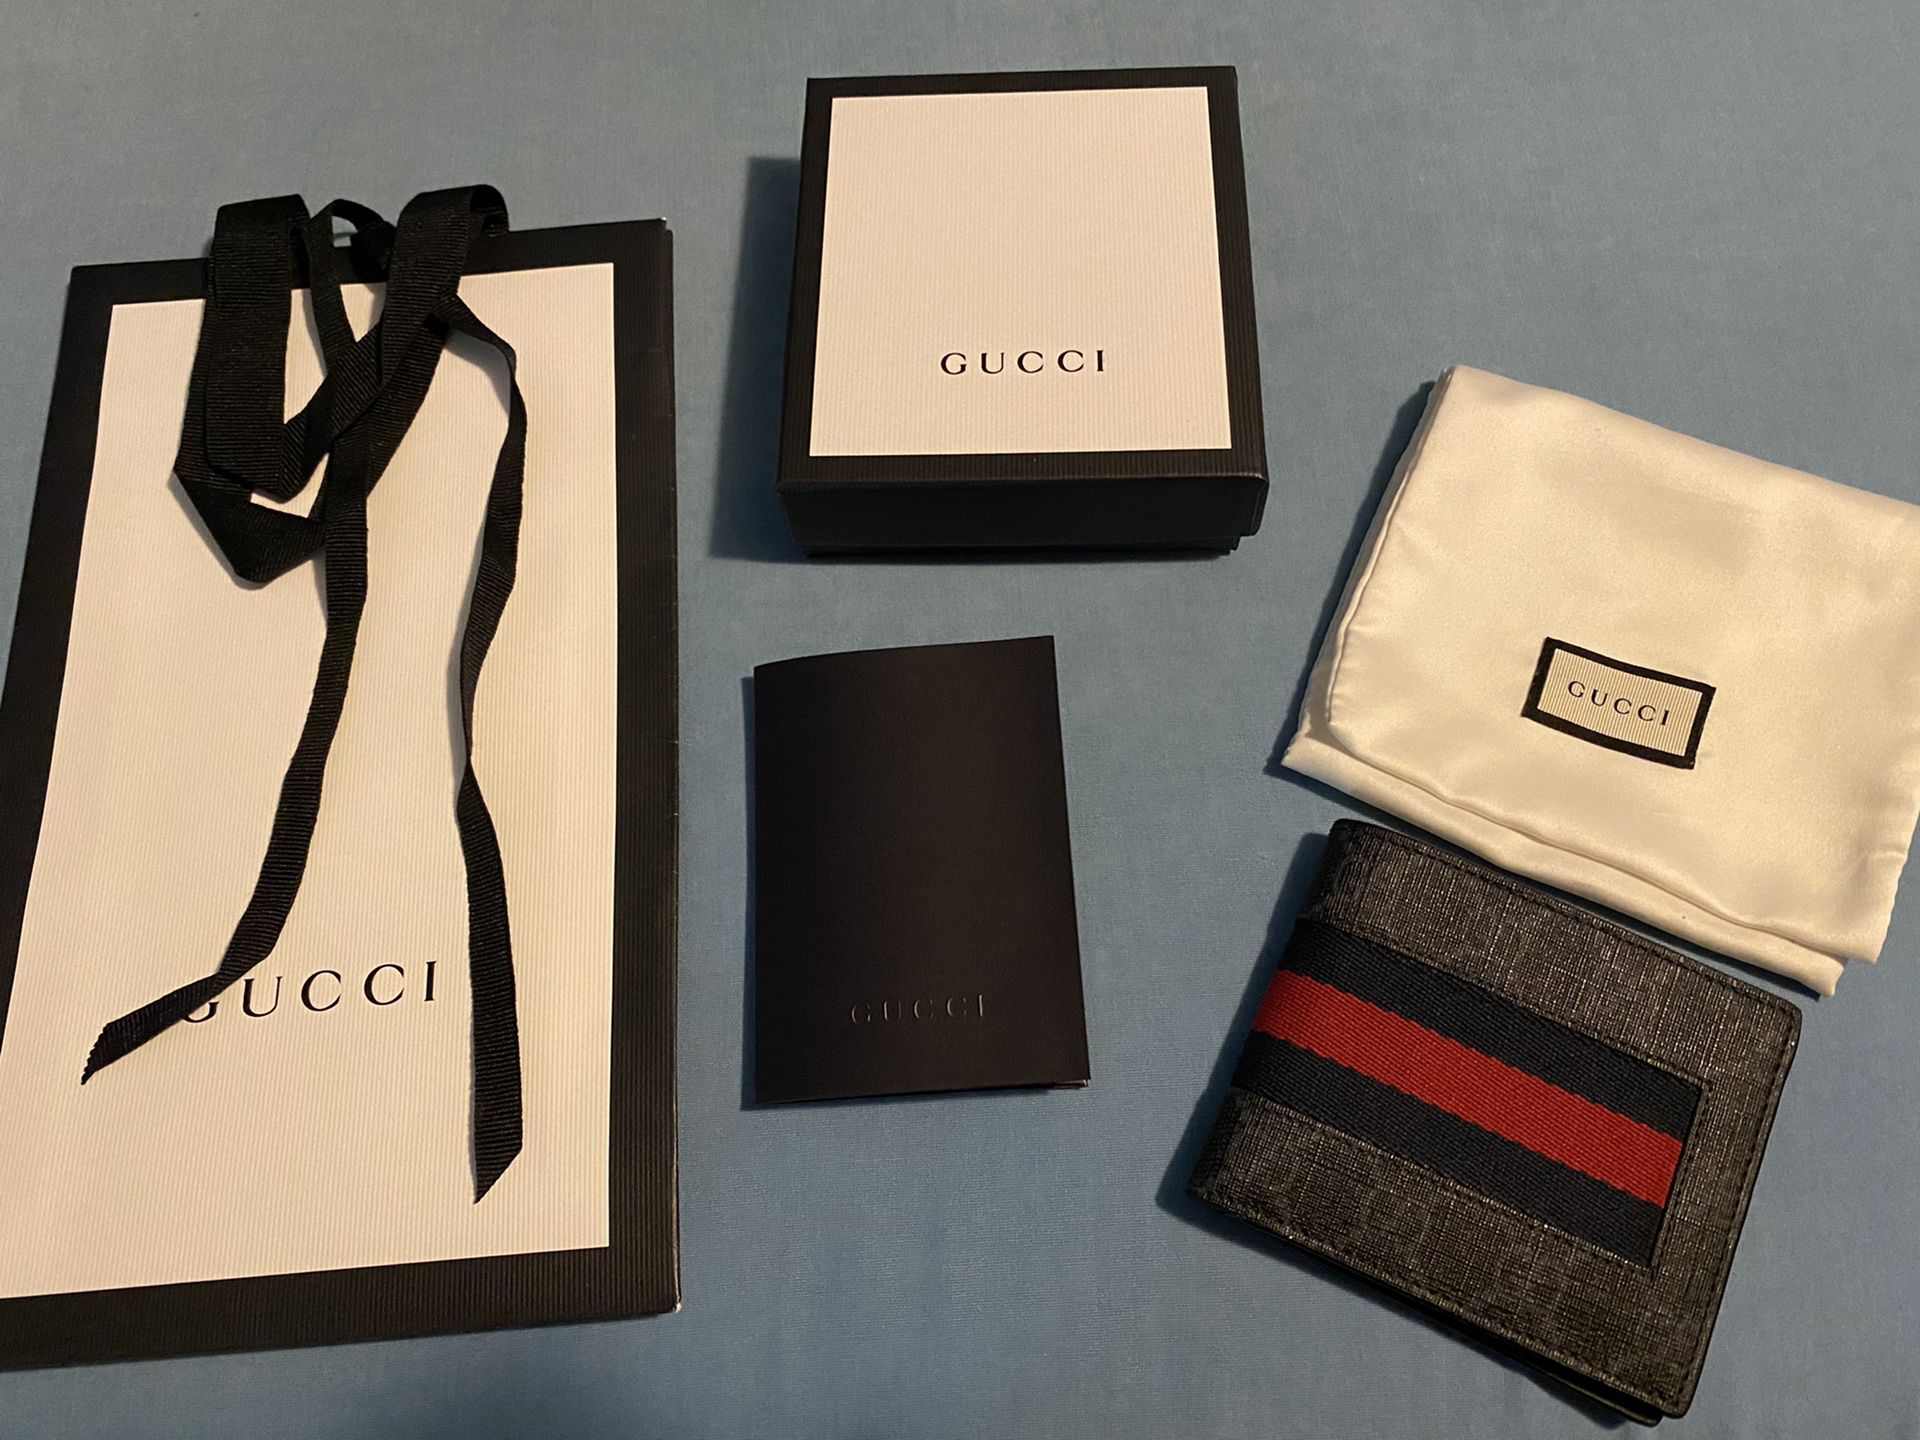 Authentic Gucci wallet.